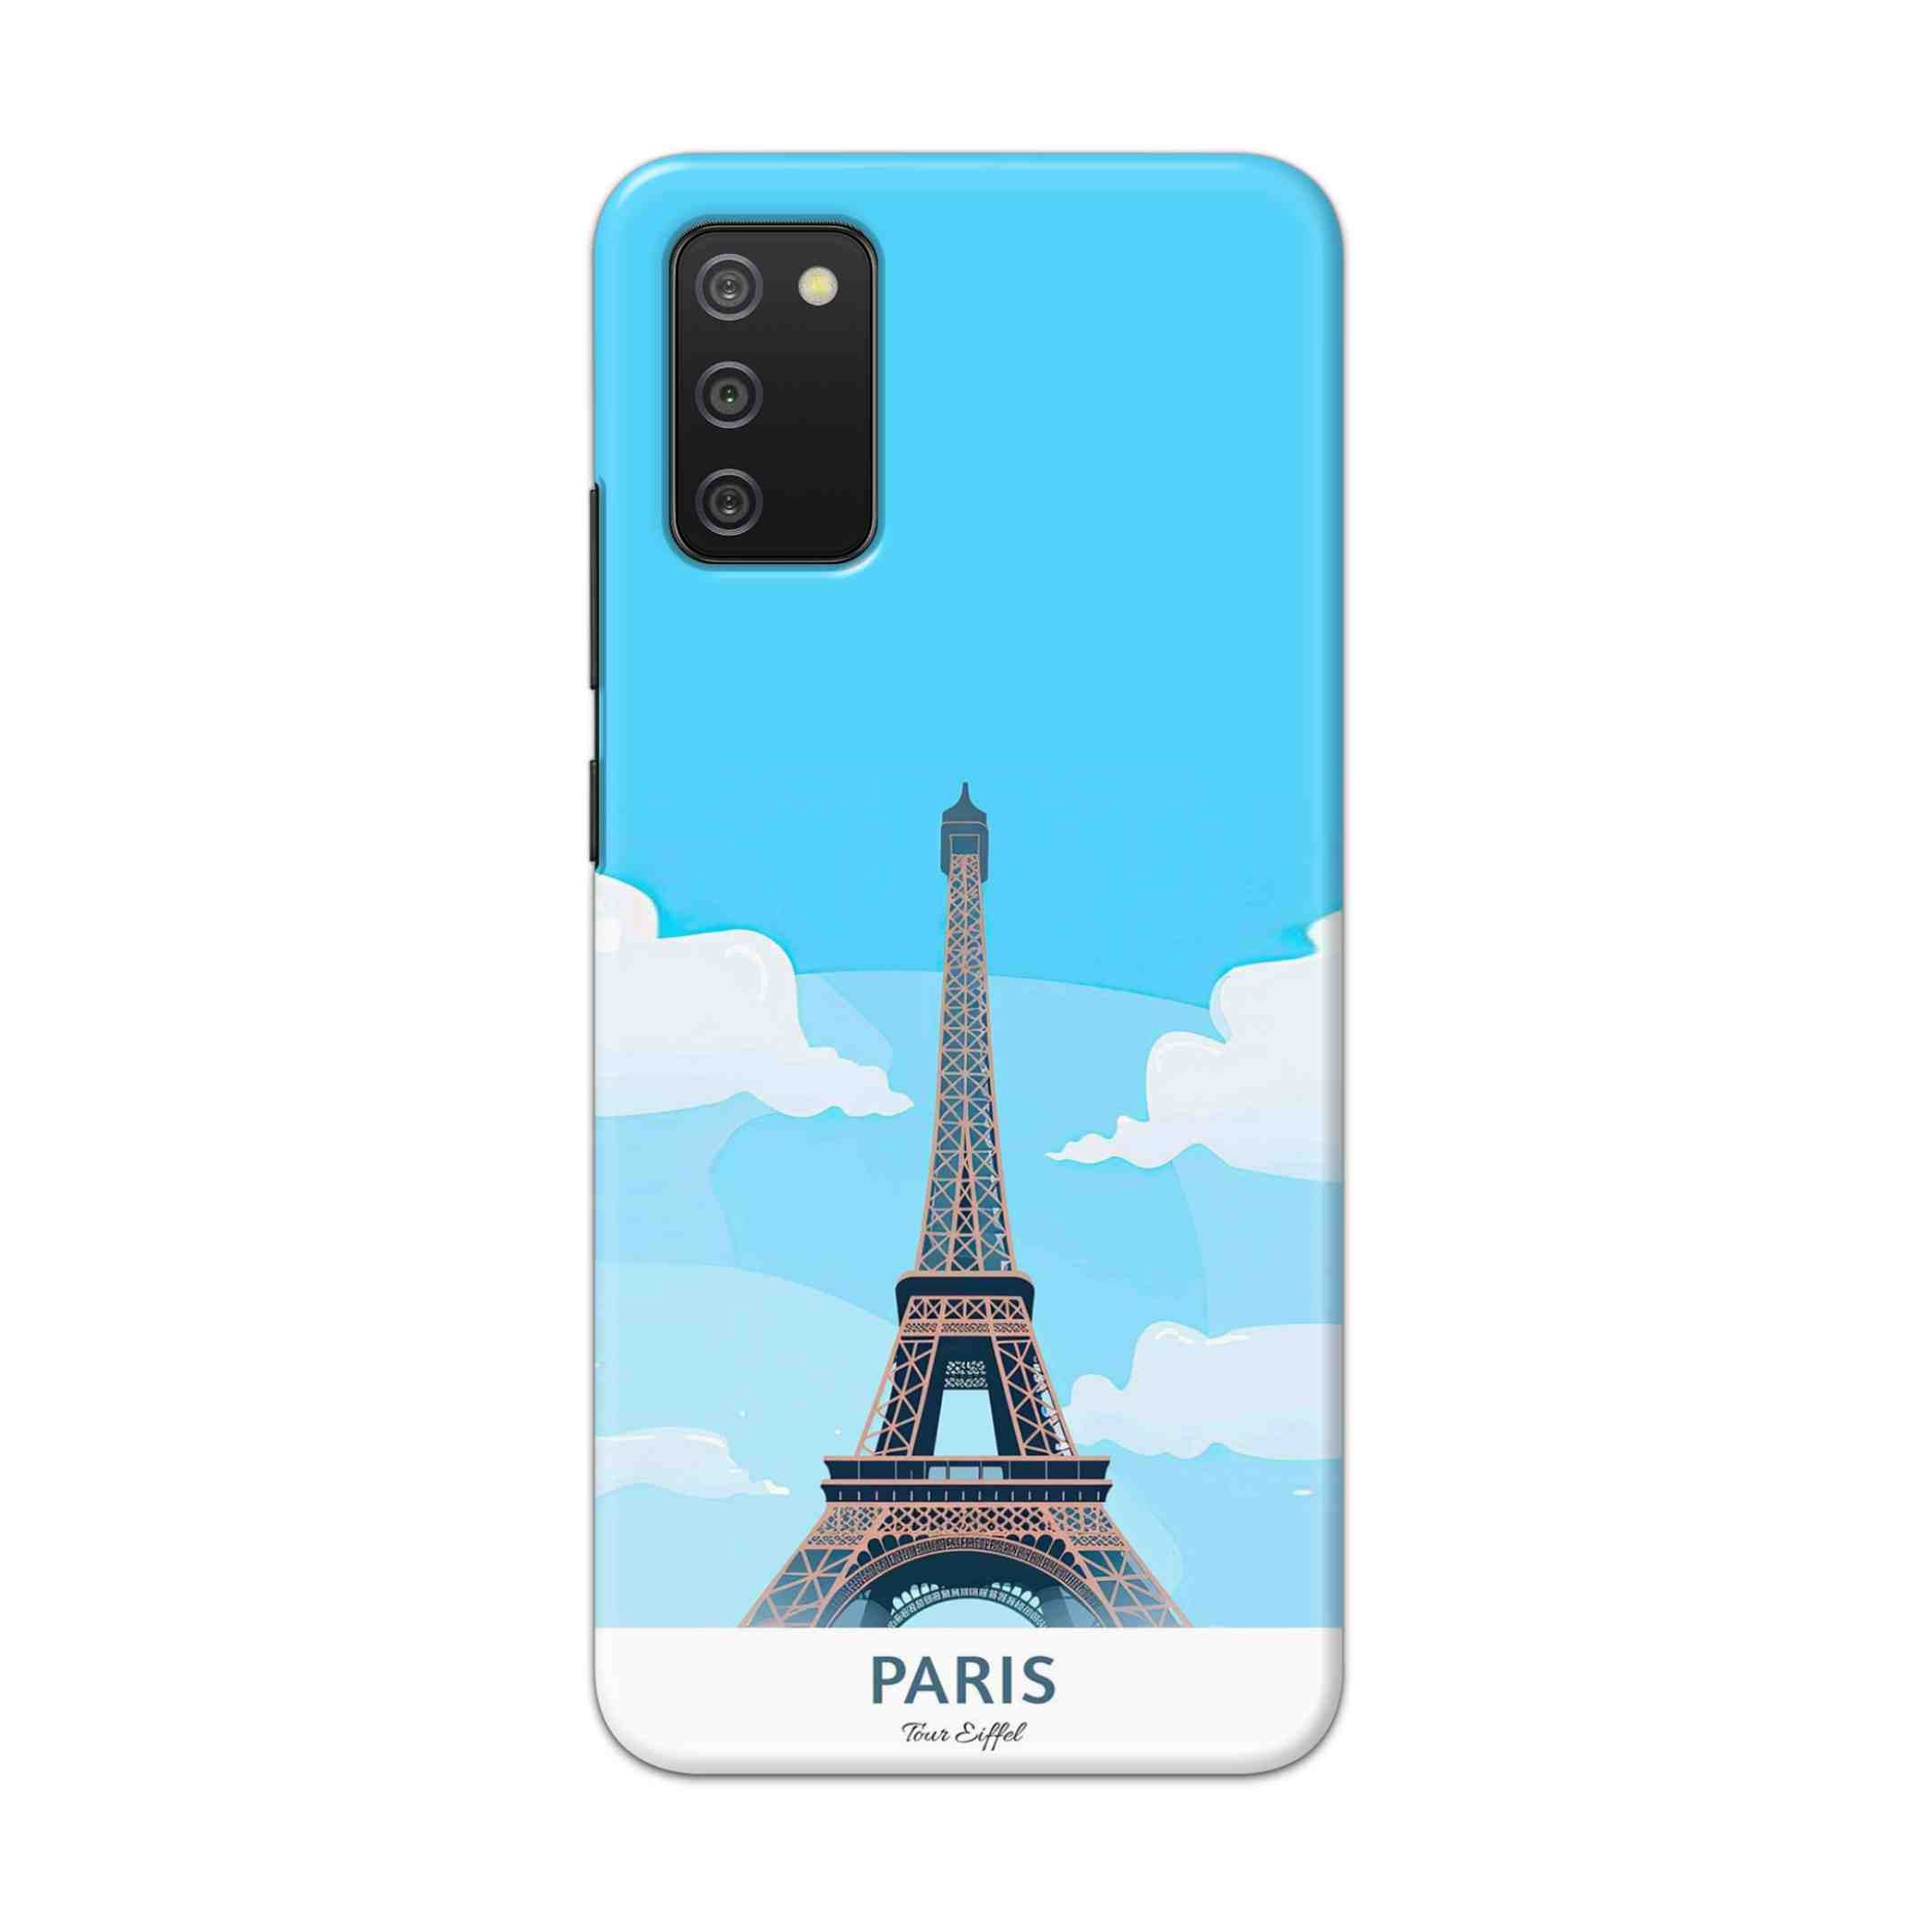 Buy Paris Hard Back Mobile Phone Case Cover For Samsung Galaxy M02s Online